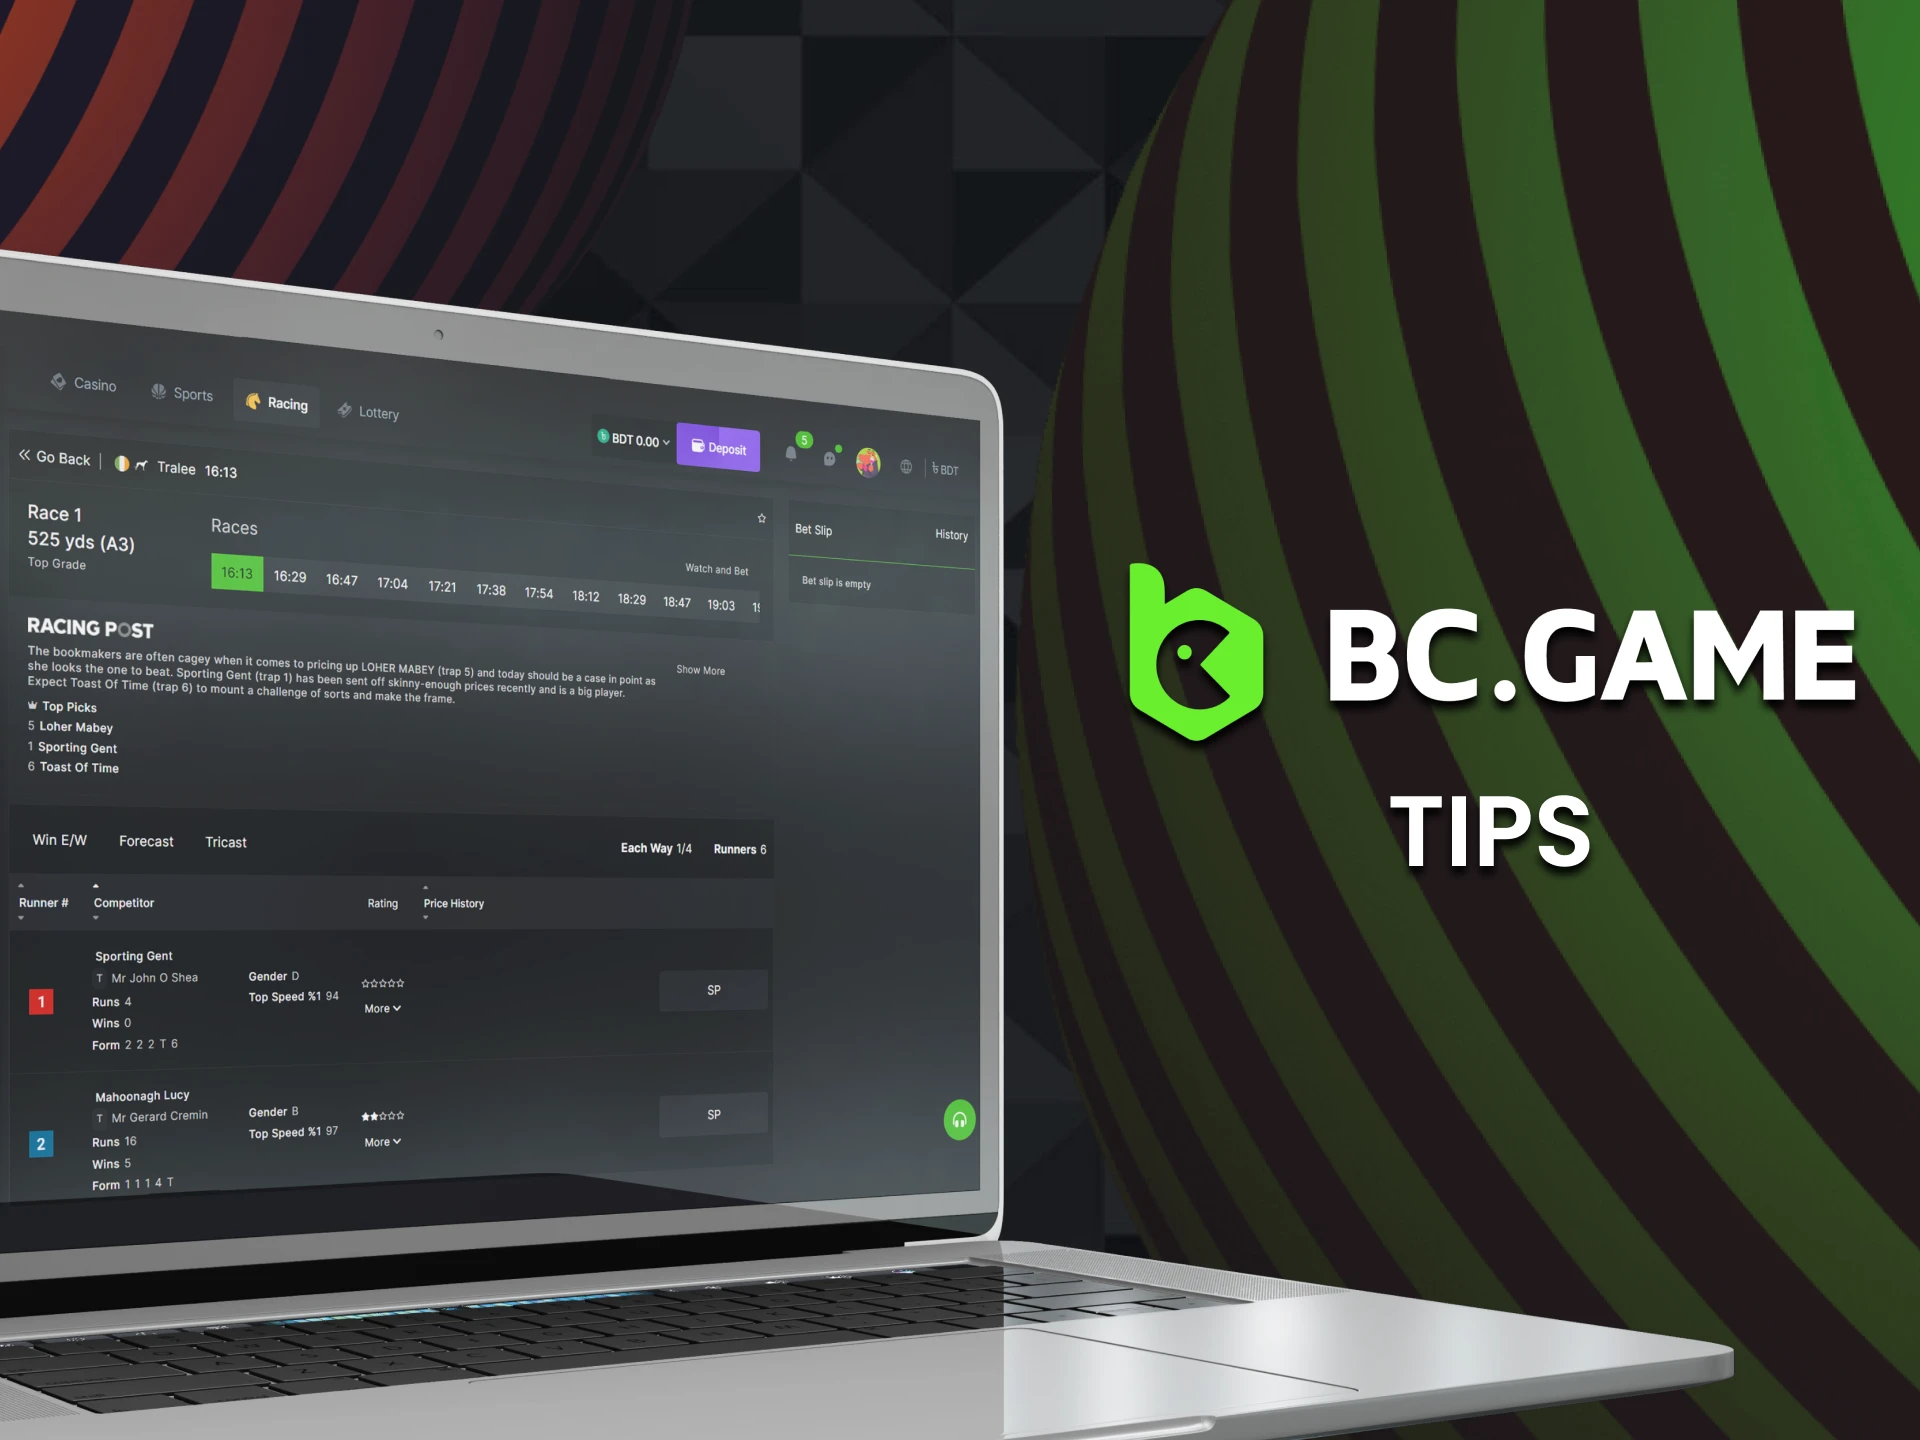 Learn horse racing betting tips from BC Game.